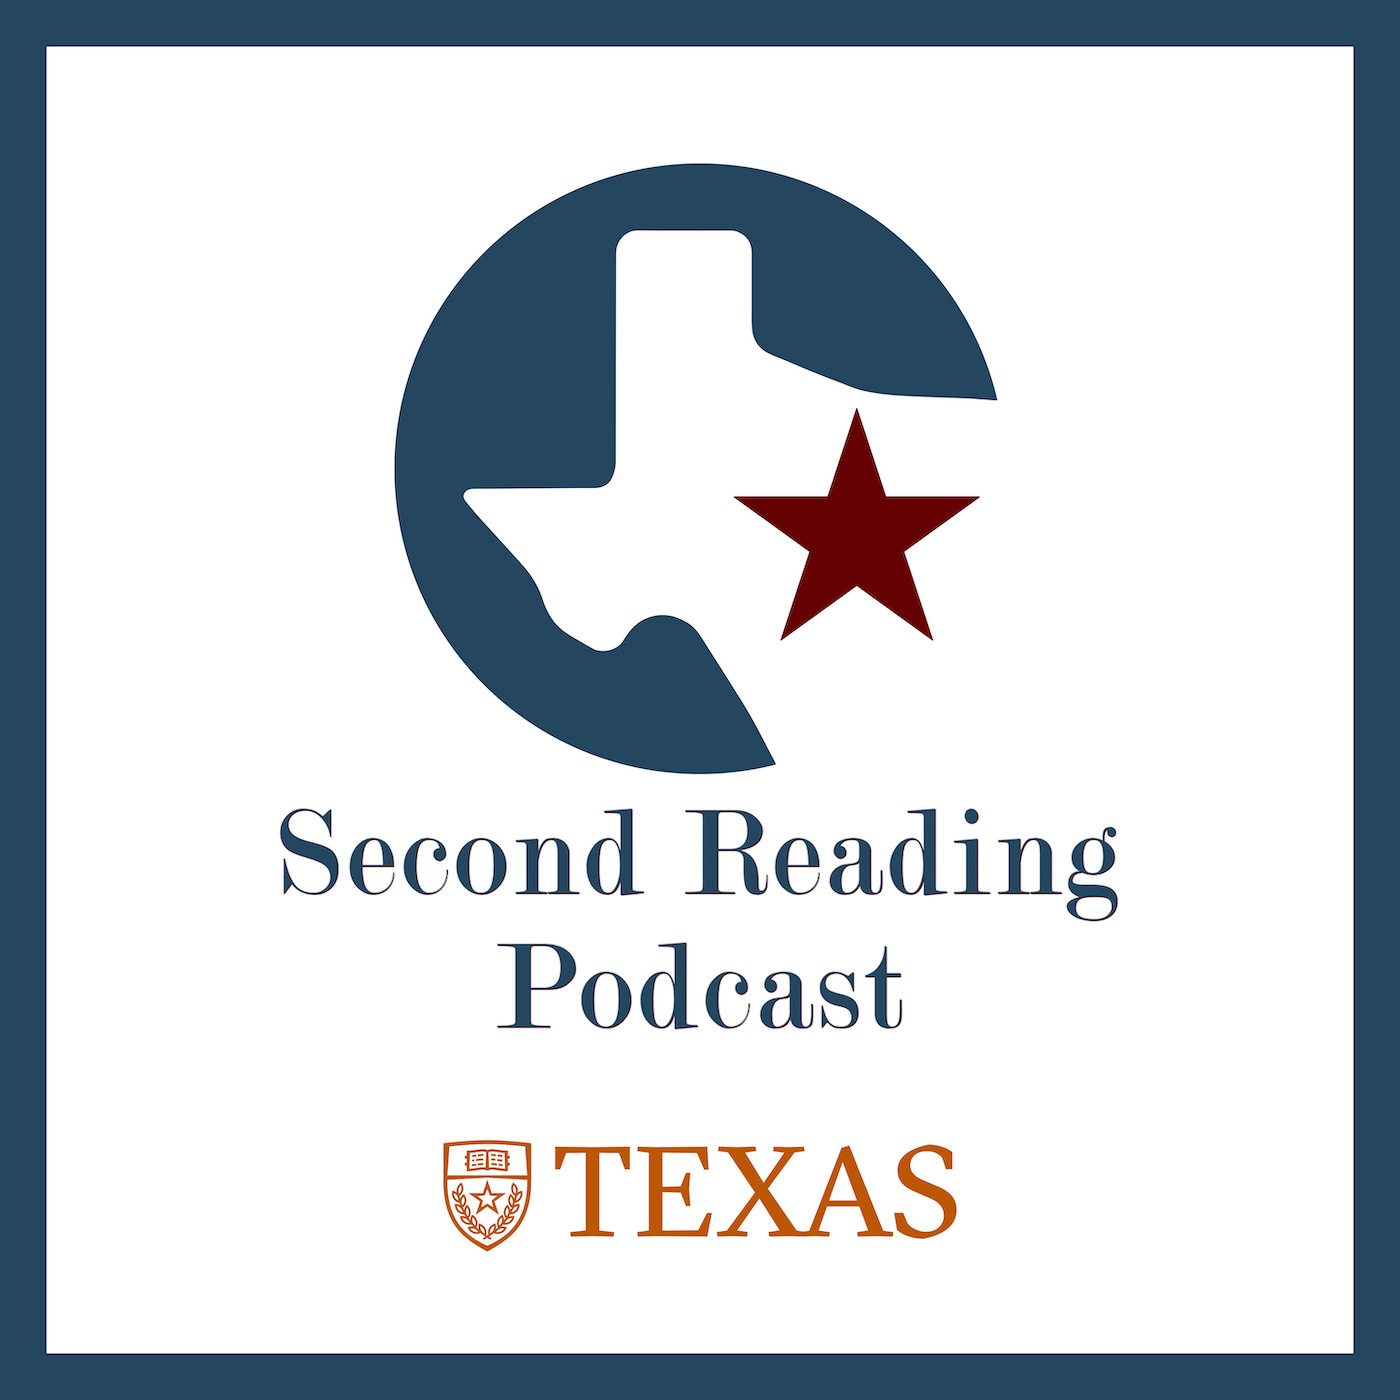 Second Reading Podcast